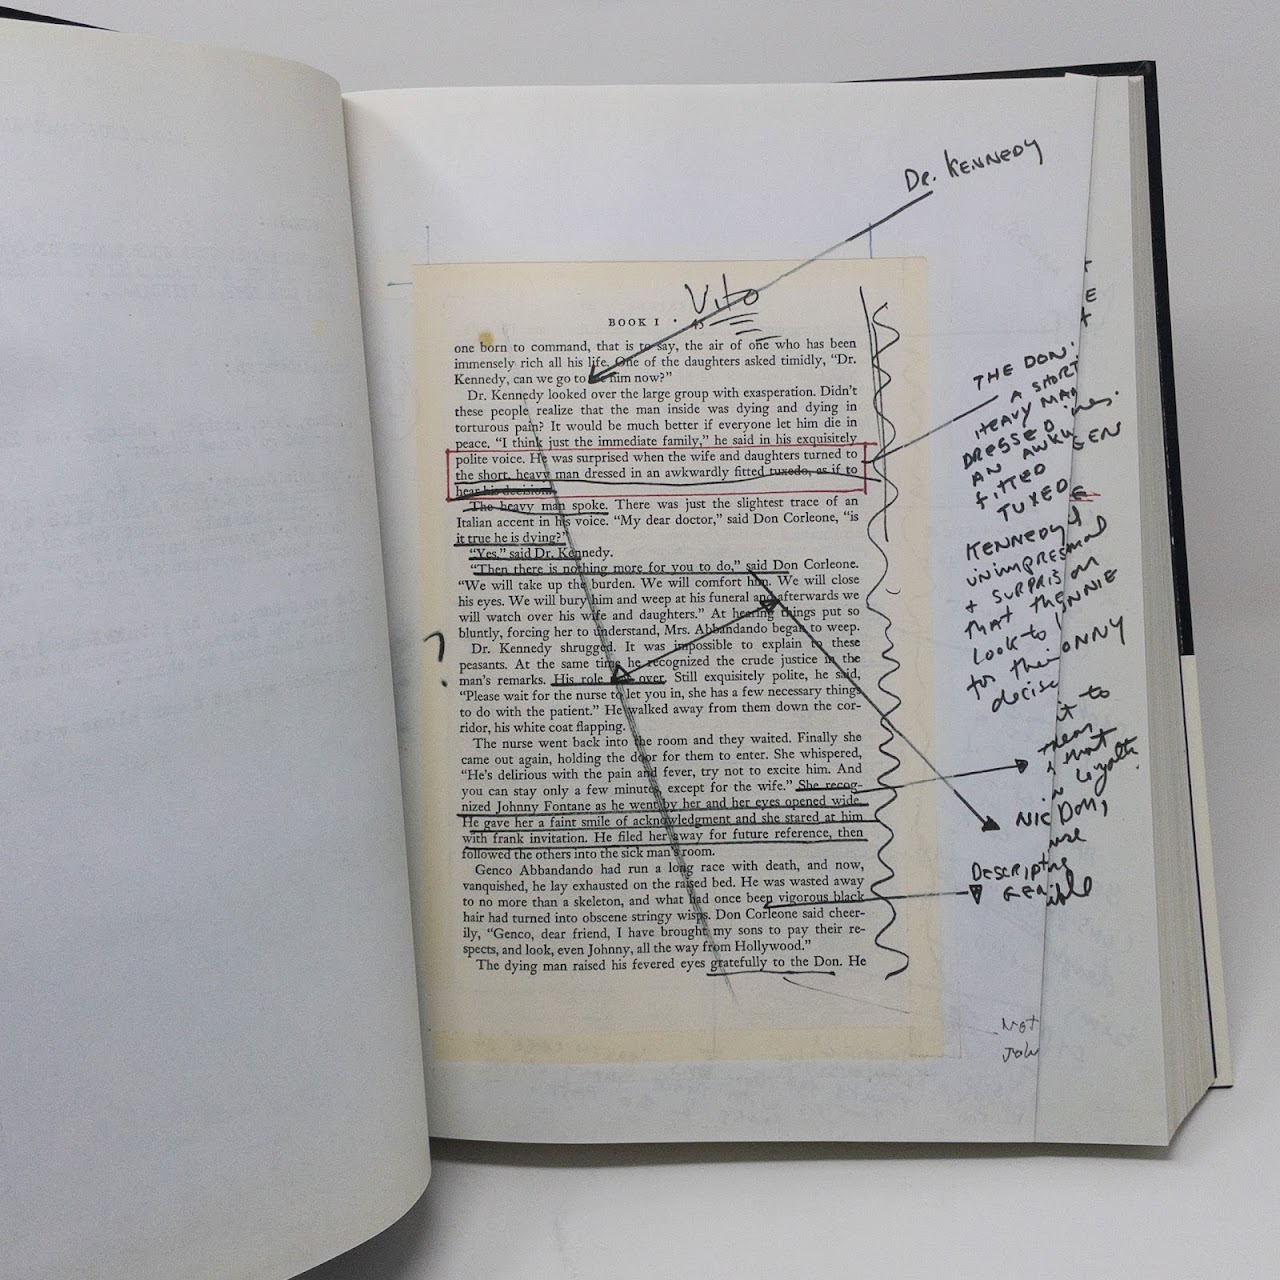 How Words Become Images: Inside The Mind of Francis Ford Coppola With The  Godfather Notebook